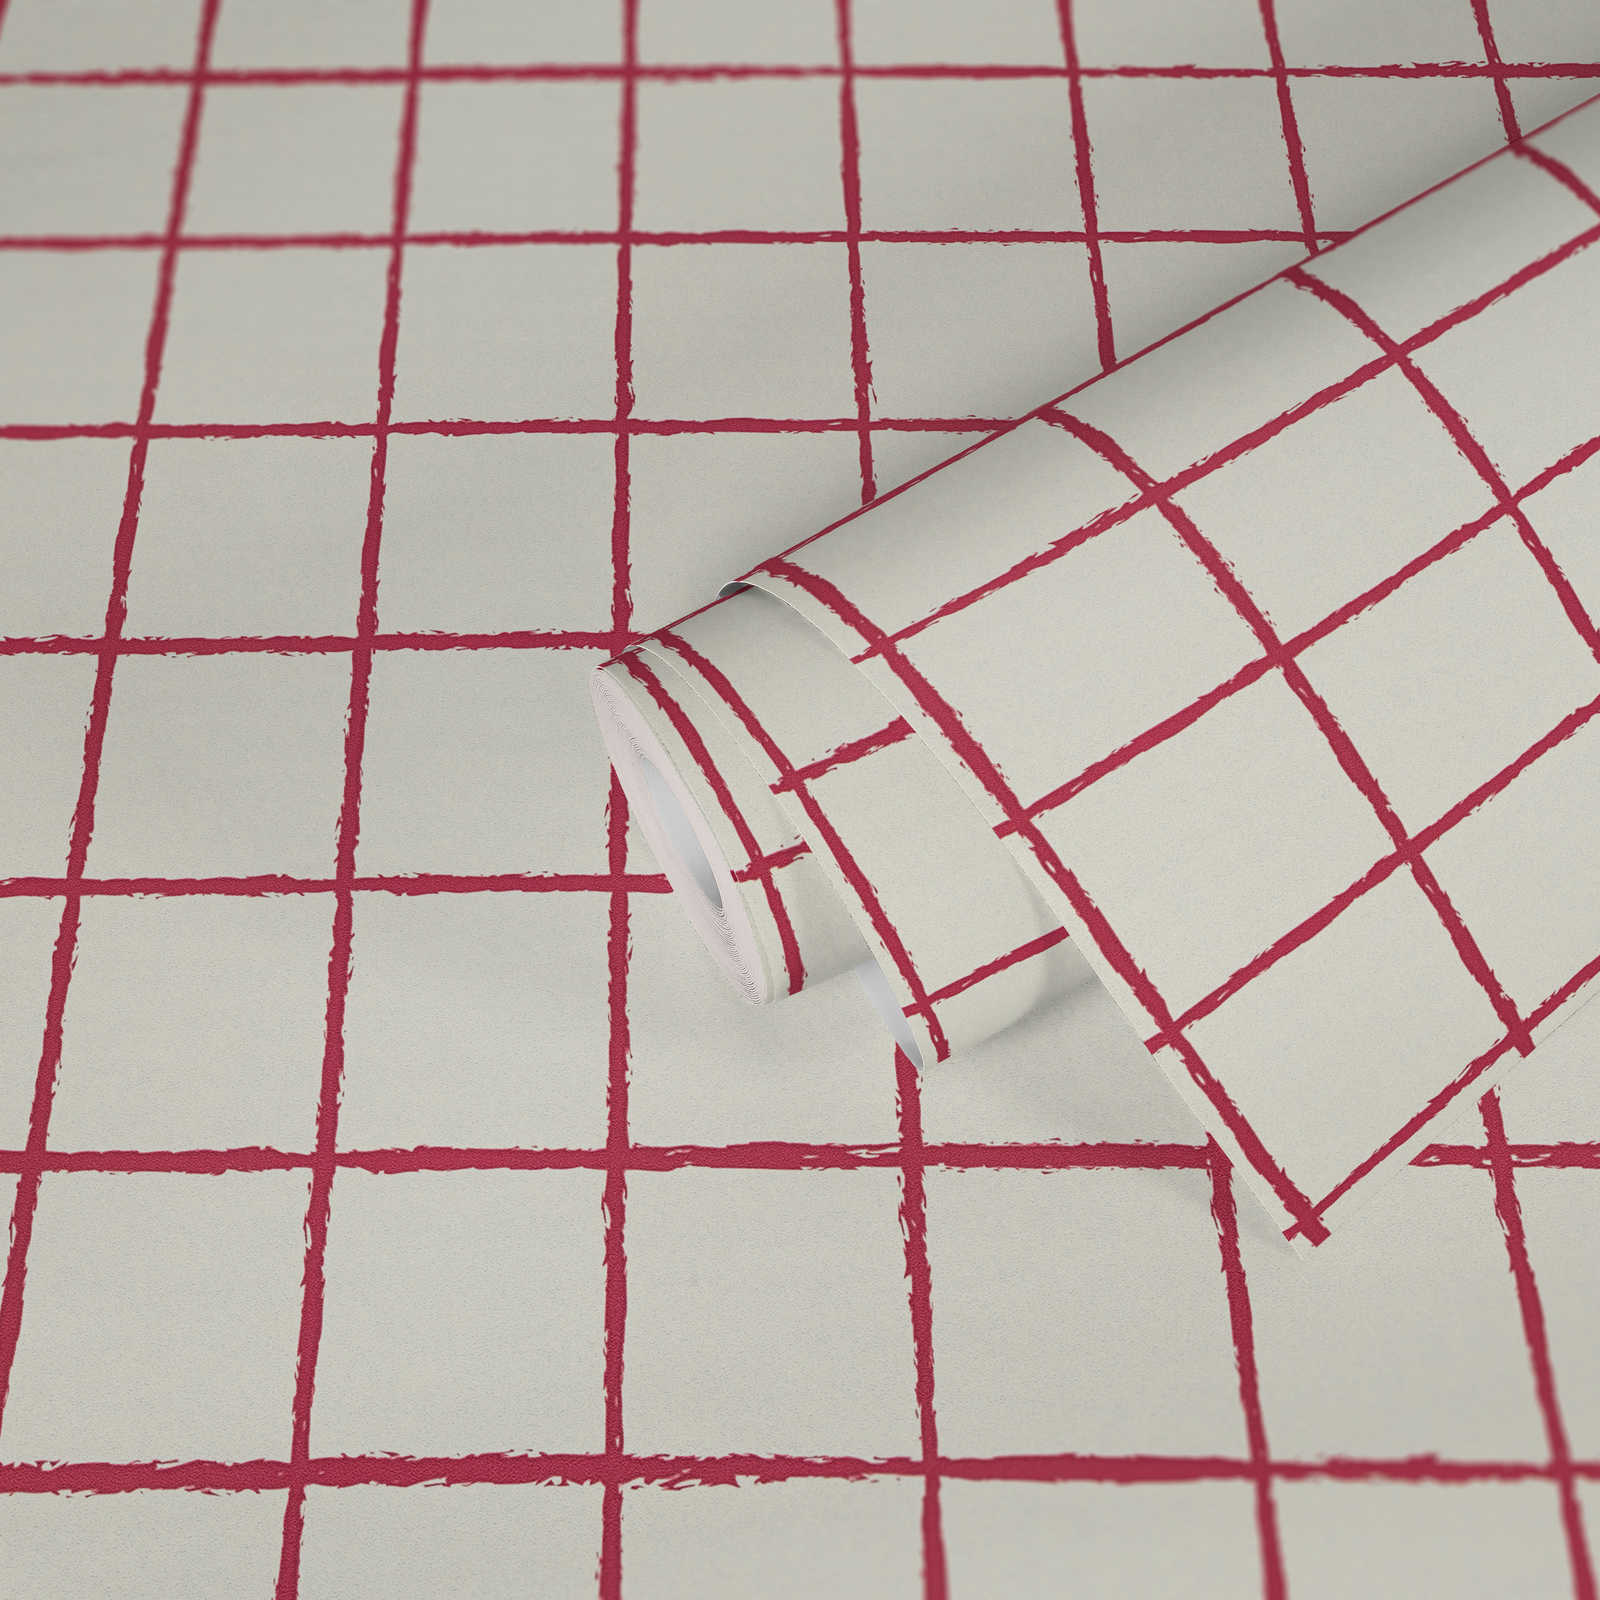             Checkered non-woven wallpaper with mesh motif - red, white
        